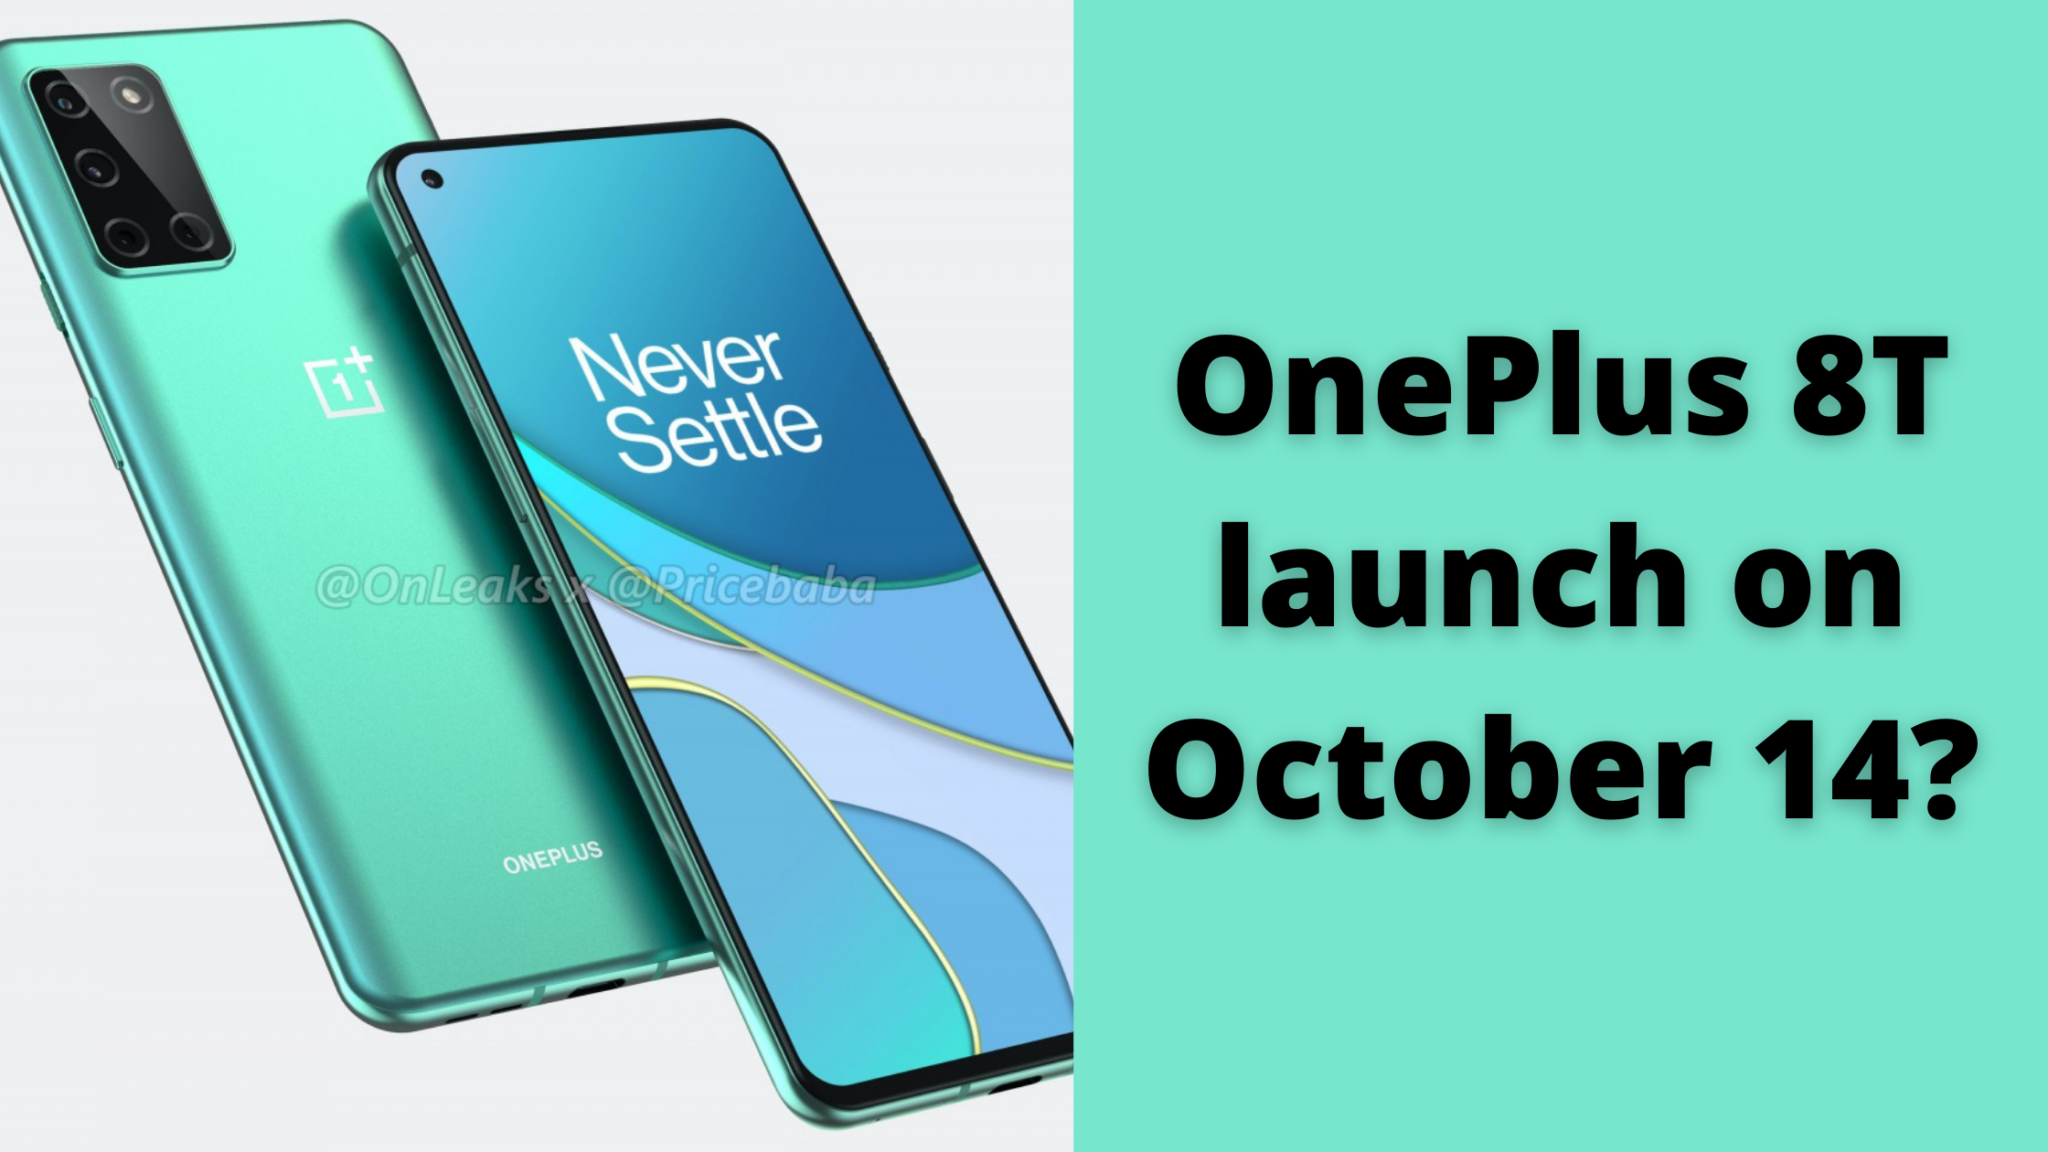 OnePlus 8T launch date rumoured to be October 14